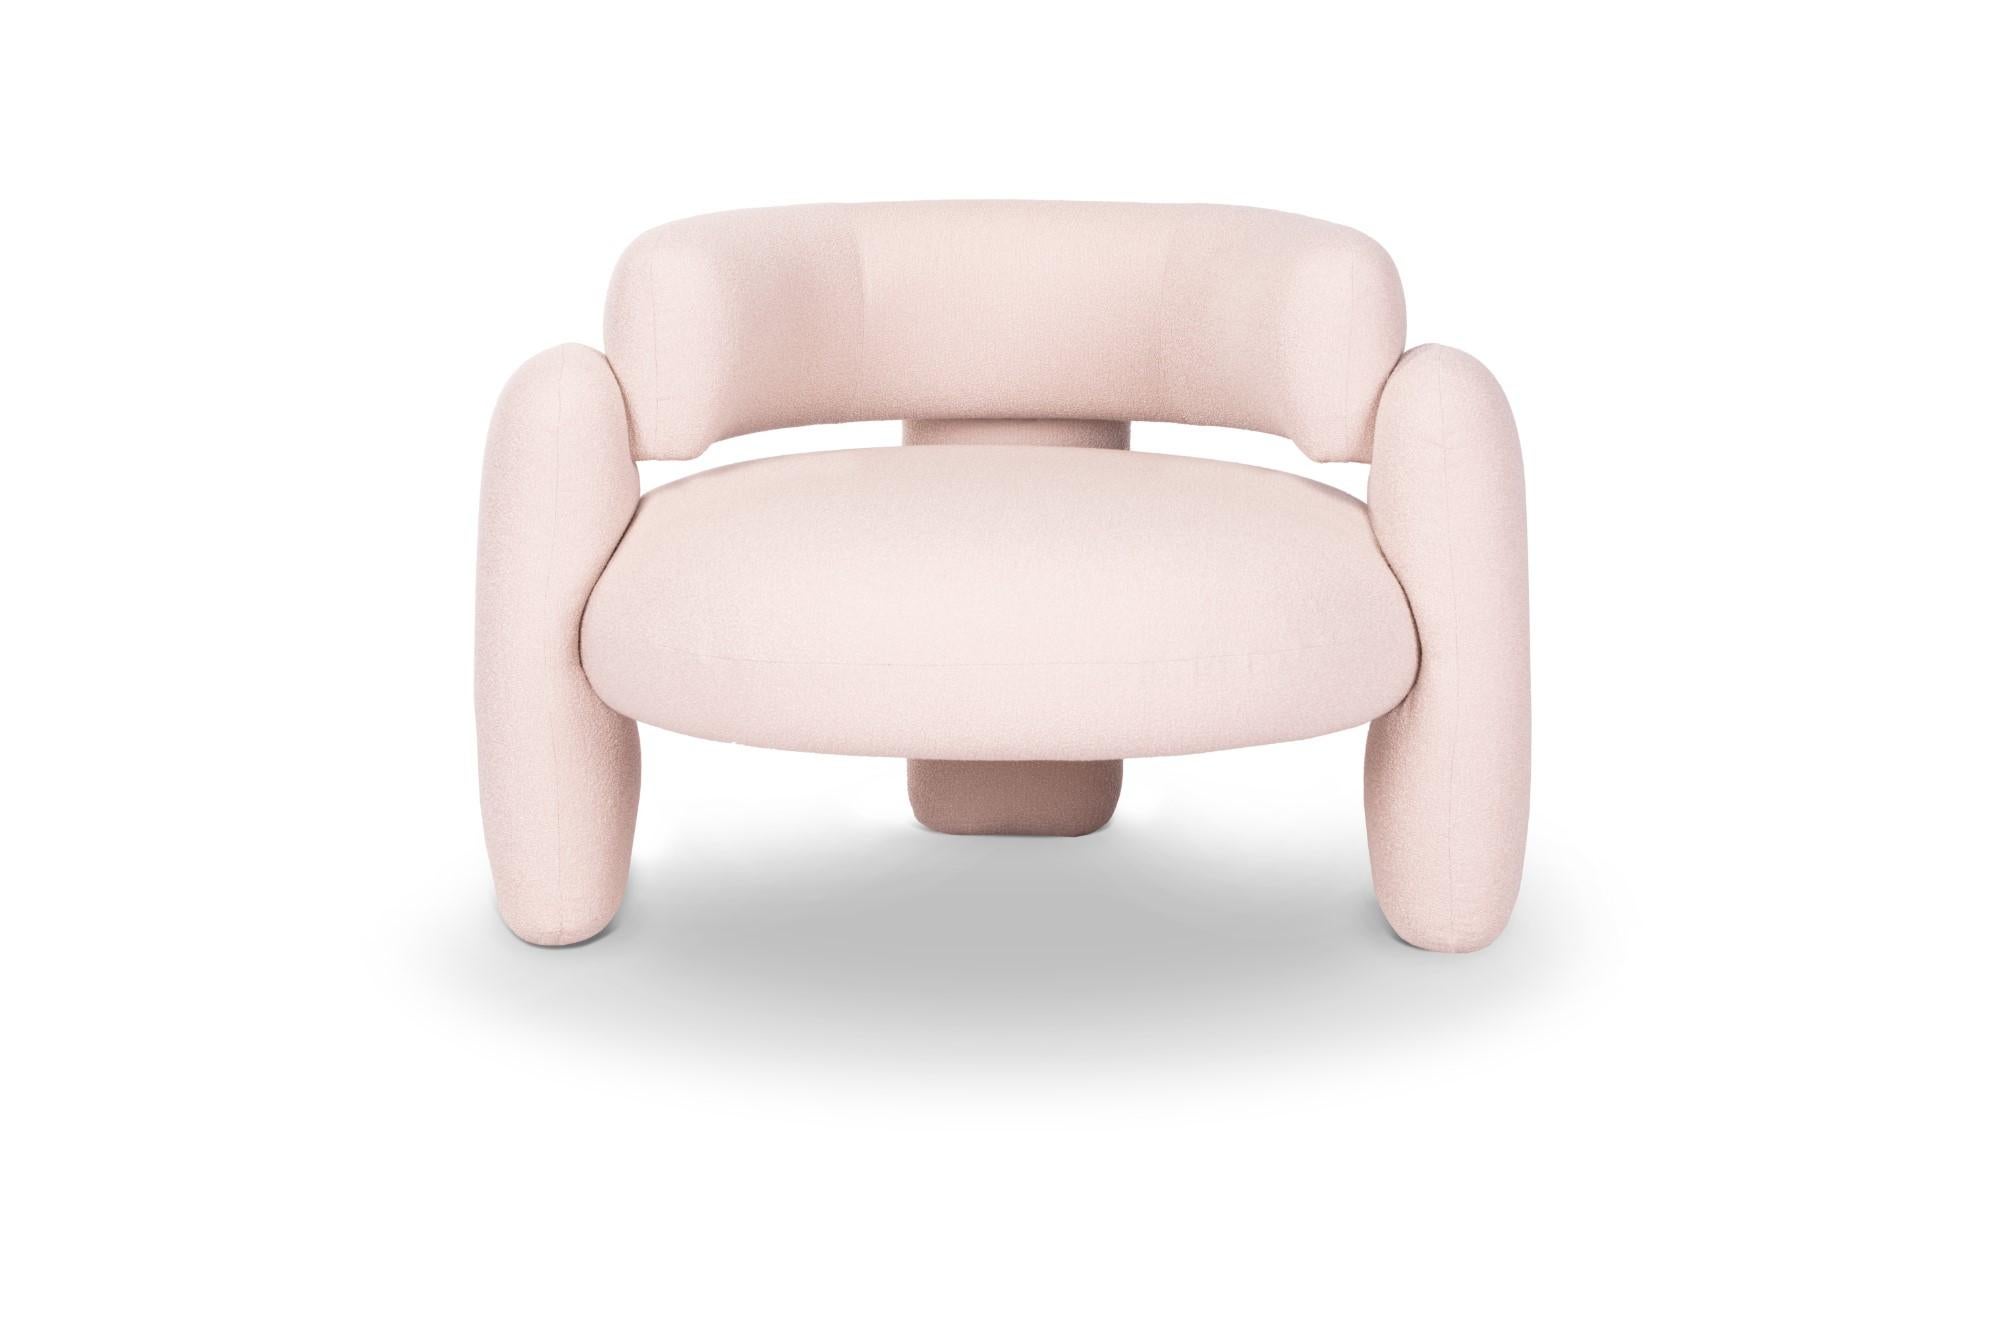 Embrace Lago Chanvre armchair by Royal Stranger
Dimensions: W 96 x D 85 x H 68 cm.
Different upholstery colors and finishes are available.
Materials: Upholstery.

Featuring an enfolding composition of geometrical shapes, the Embrace Armchair